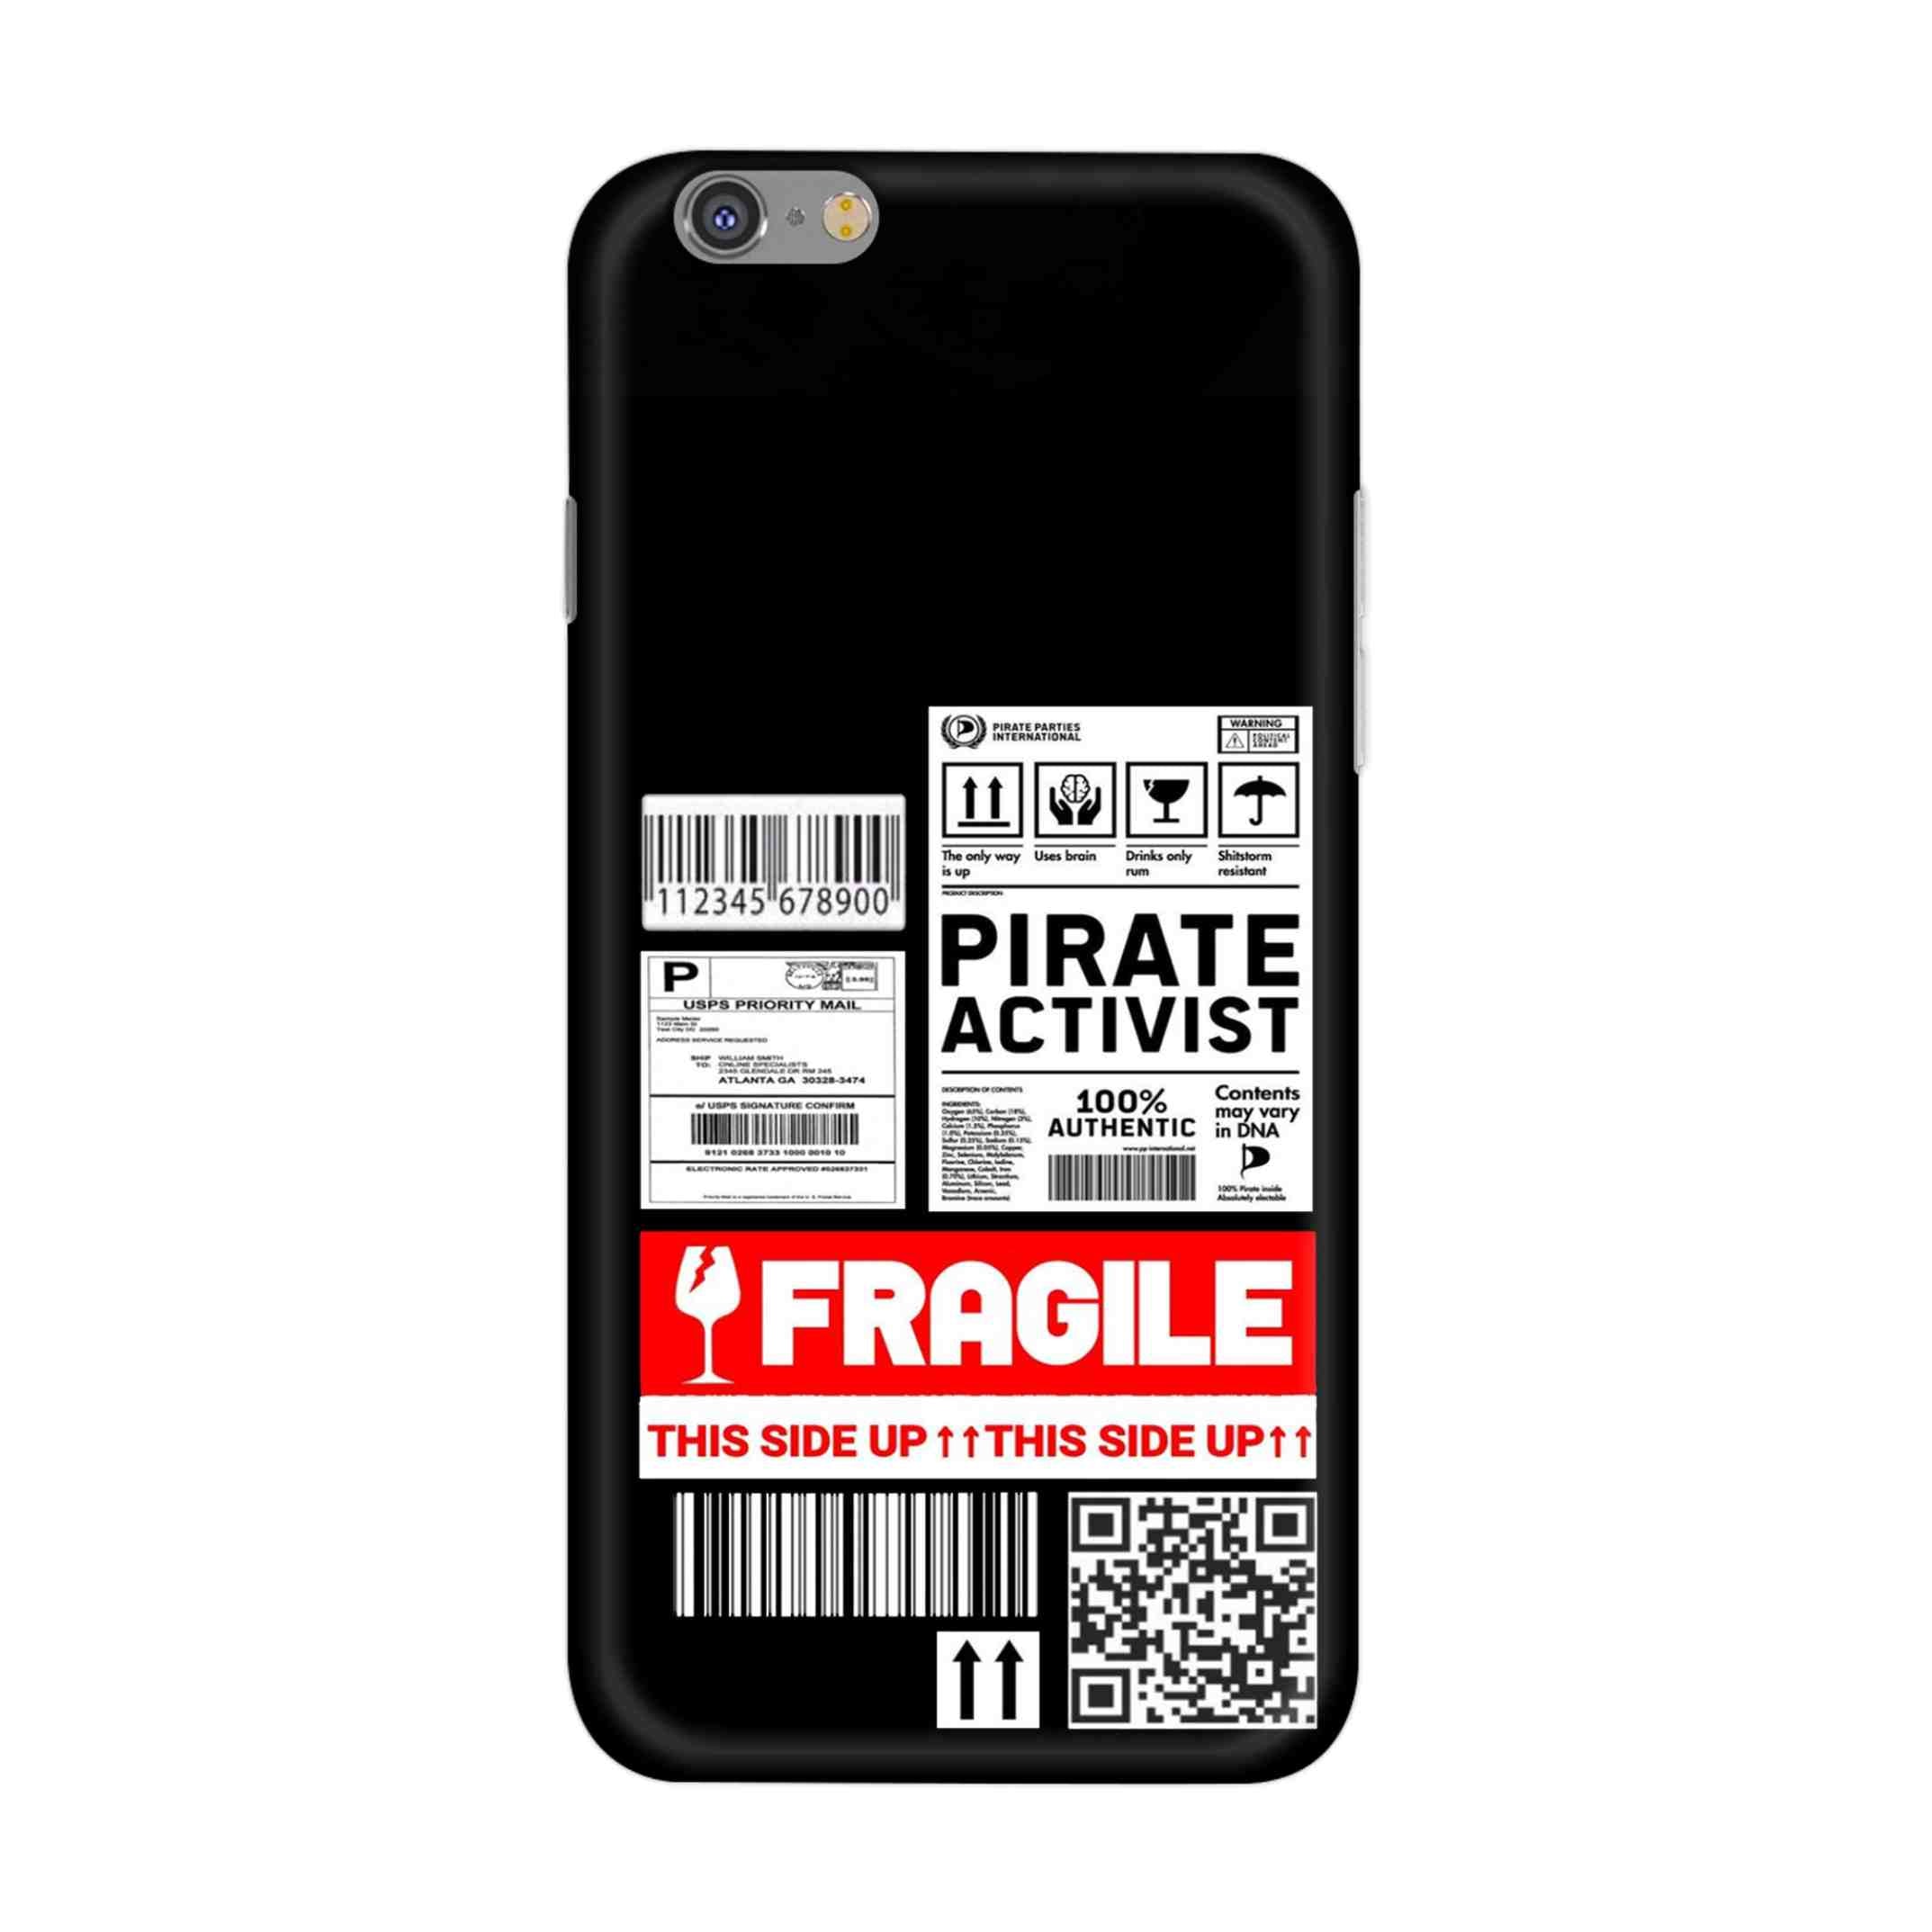 Buy Fragile Hard Back Mobile Phone Case/Cover For iPhone 6 / 6s Online